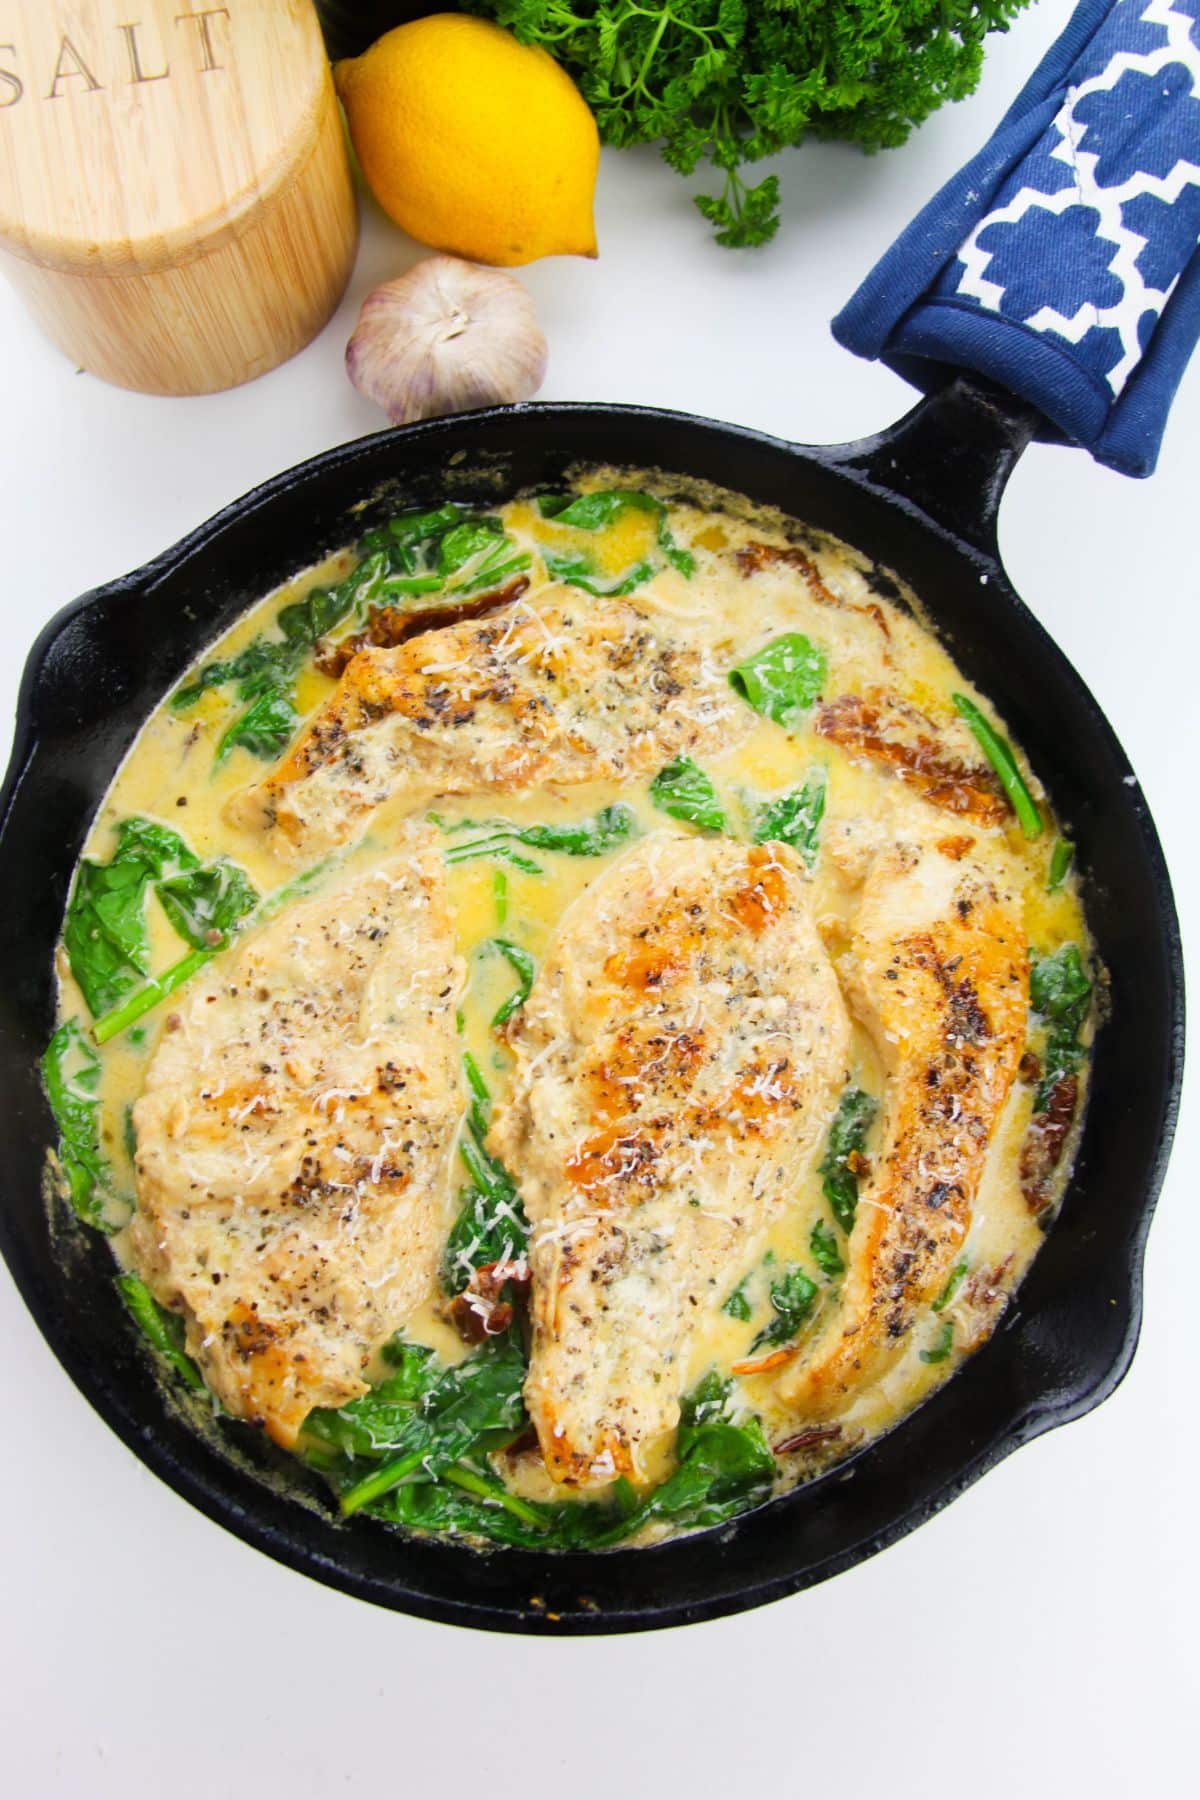 Cooked Tuscan chicken in a skillet, garnished with parmesan cheese.